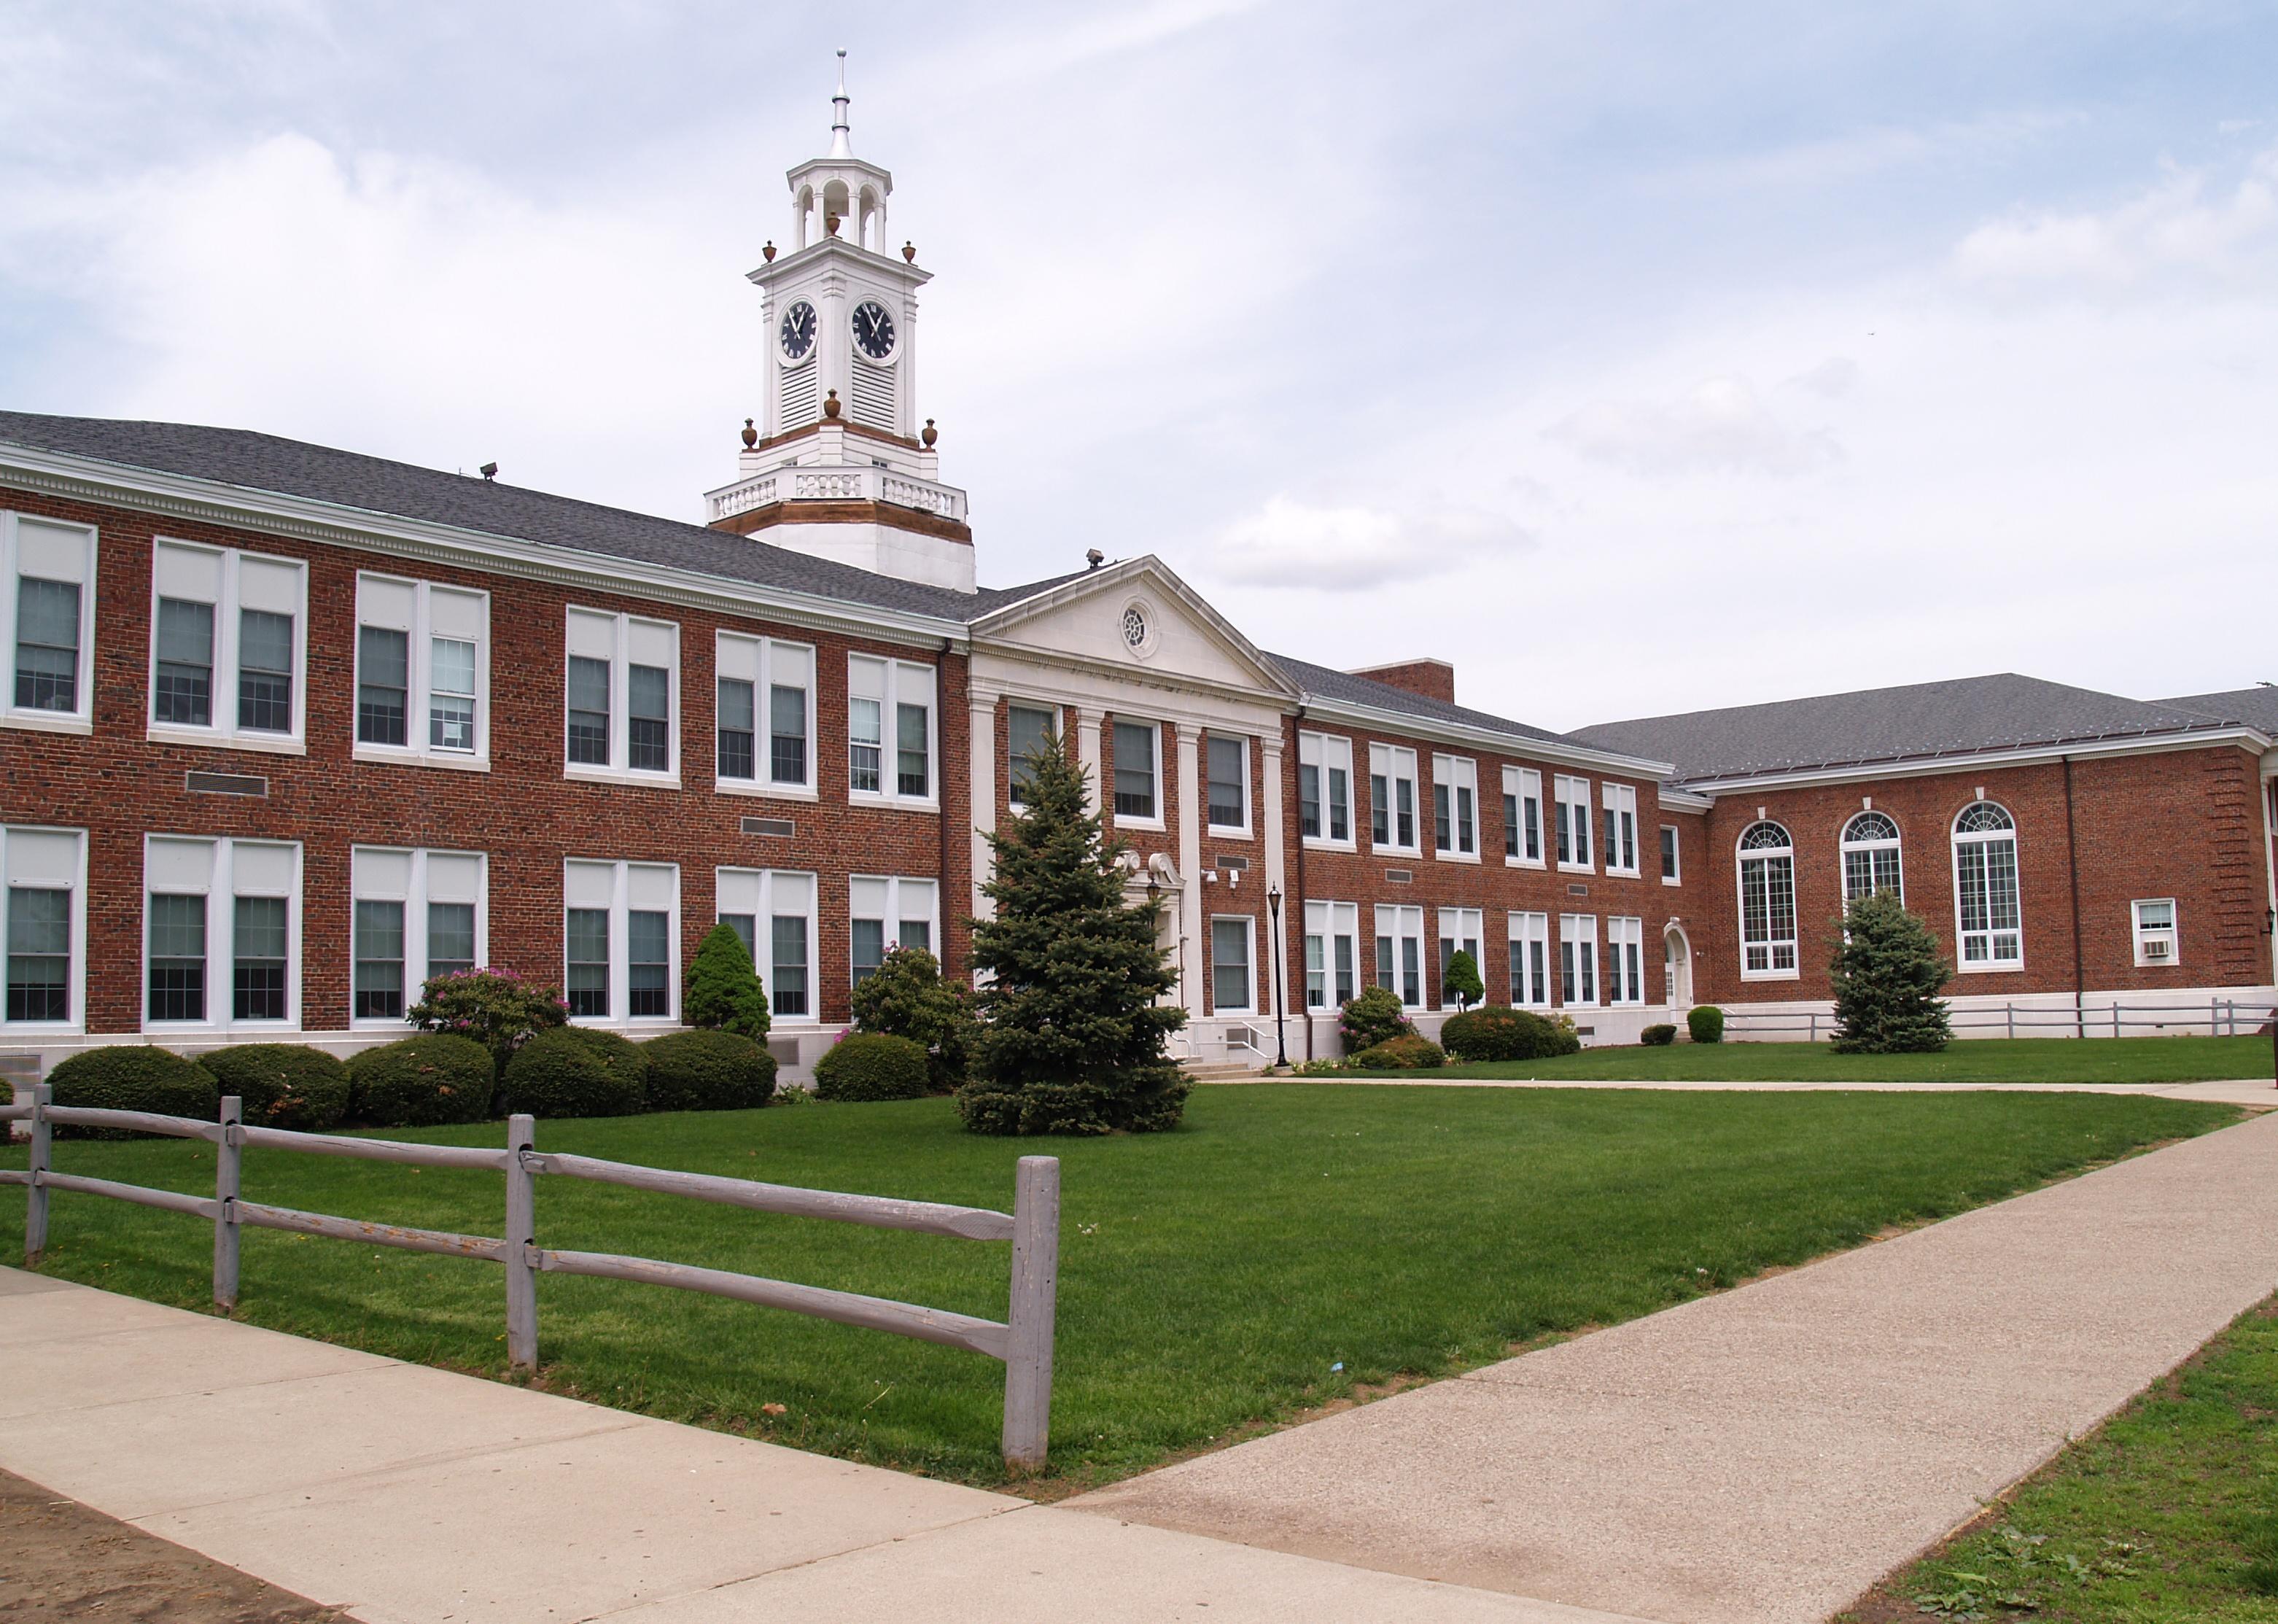 Exterior view of an old brick high school in Phillipsburg, New Jersey